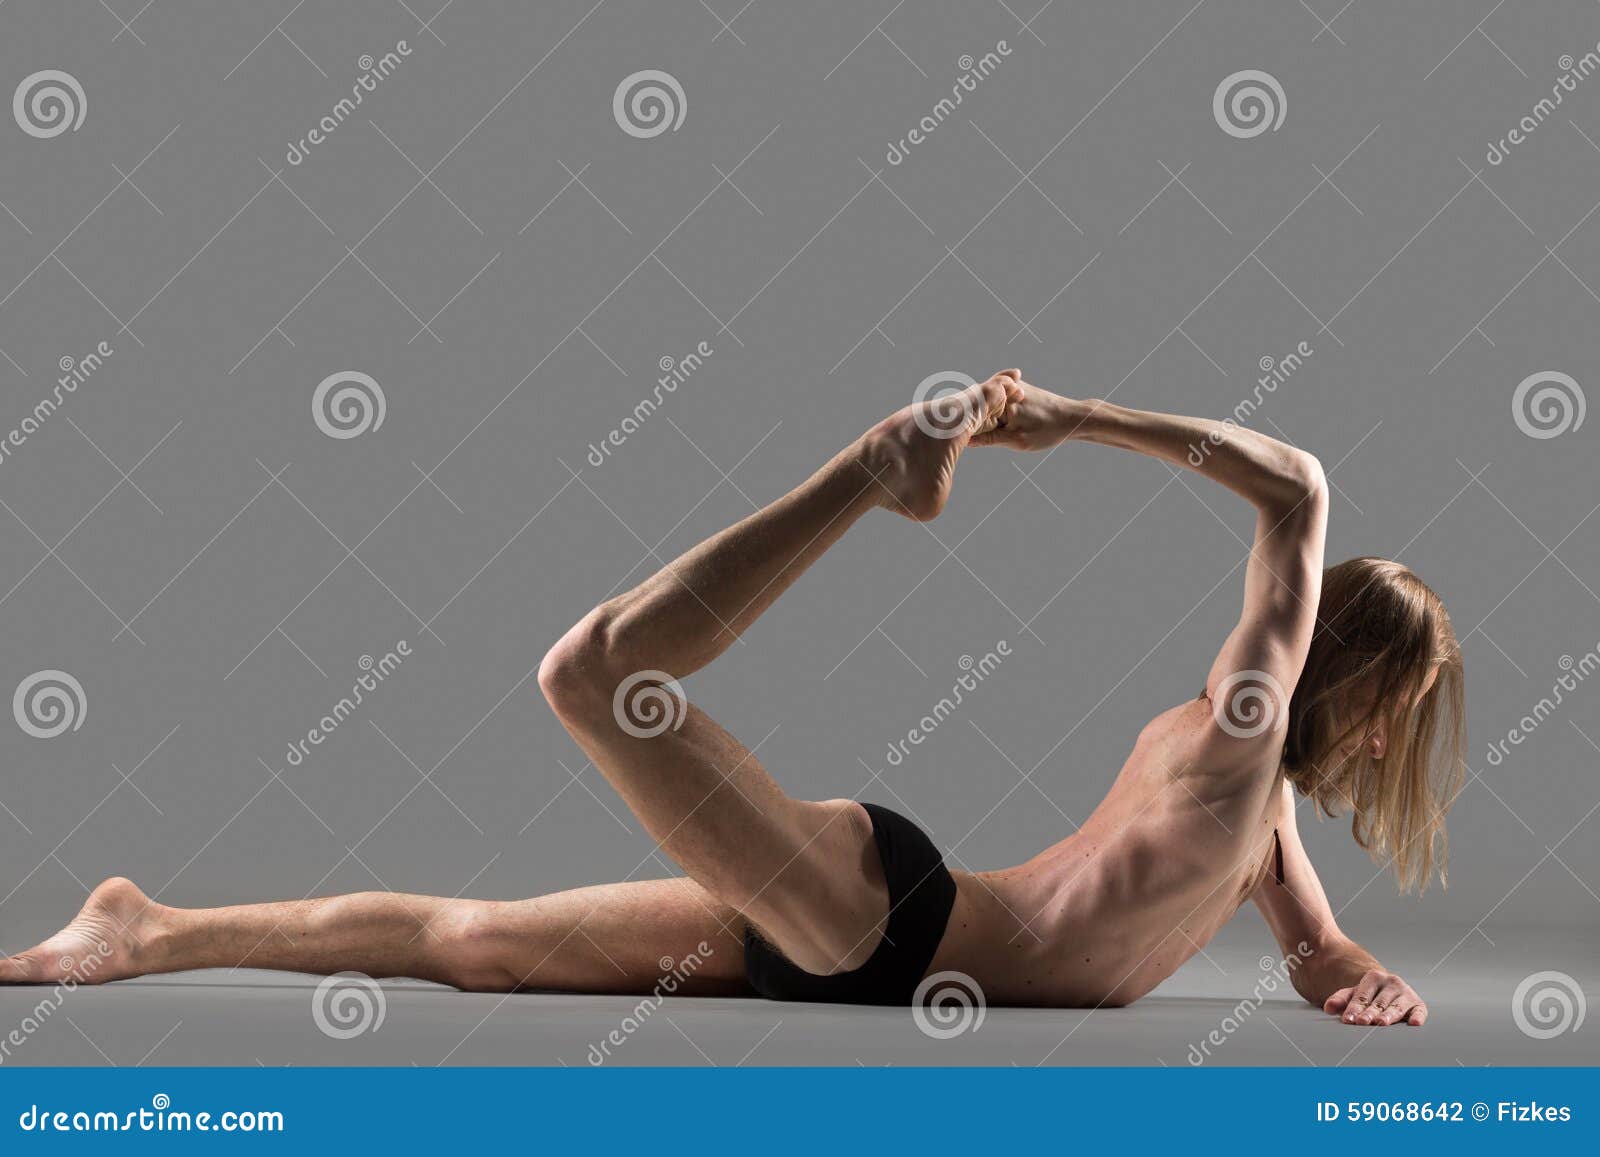 Illustration Of A Strong Man Practicing Yoga With A Standing Half Bow Pose  Stock Illustration - Download Image Now - iStock